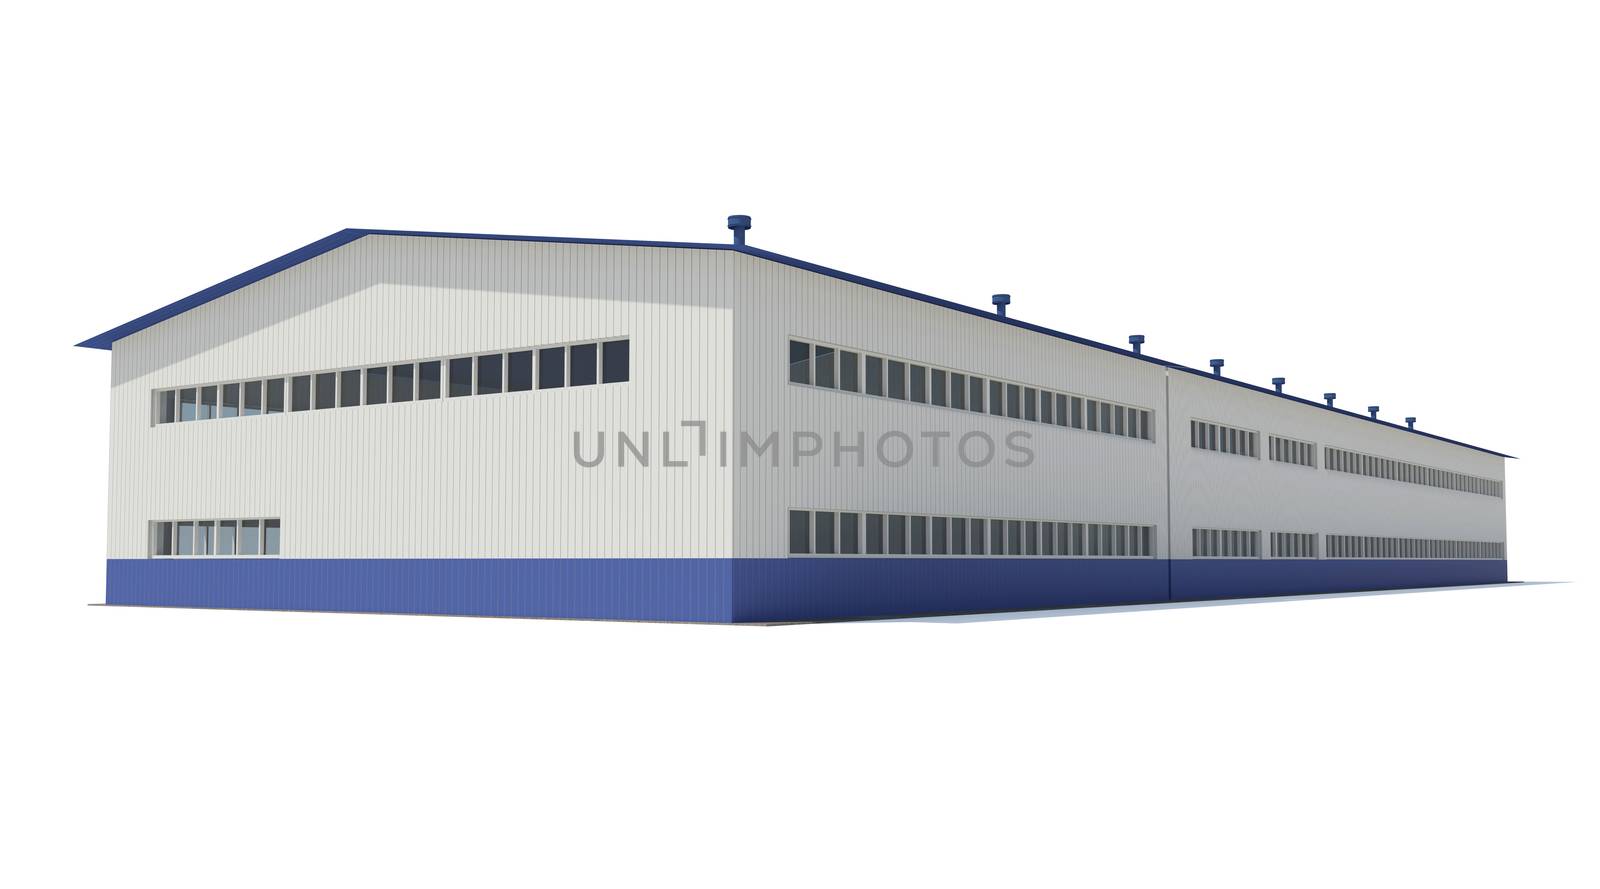 Industrial building. Isolated render on a white background